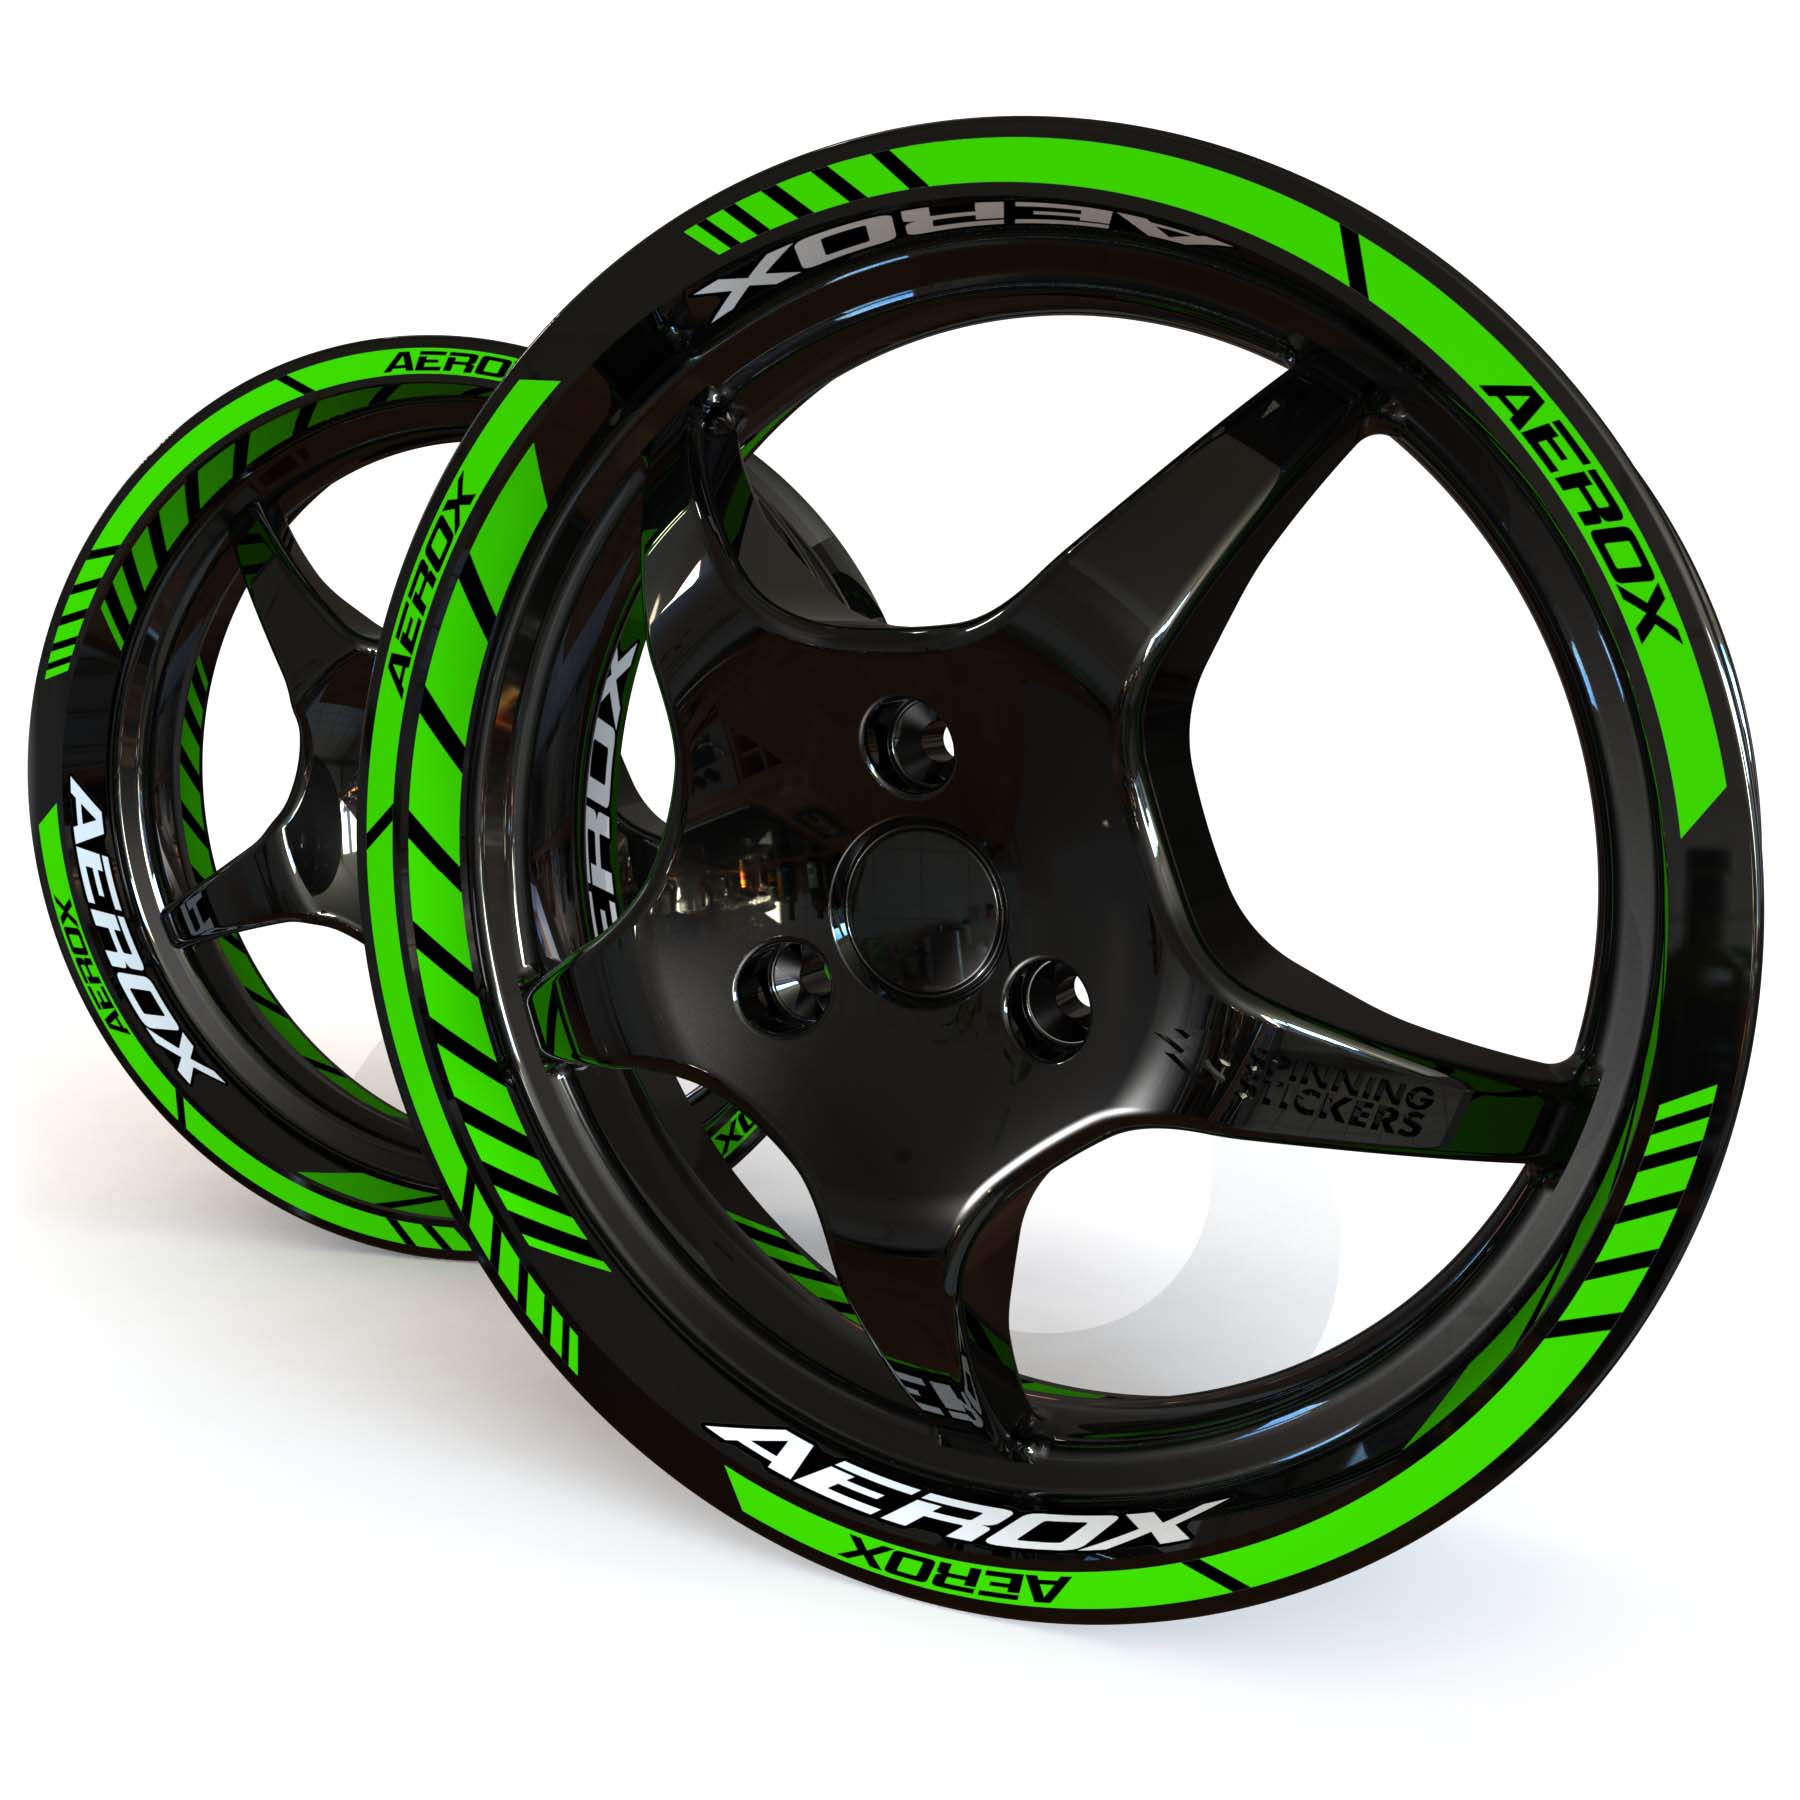 Green and white Yamaha Aerox wheel stickers on a black 12 inch moped rim